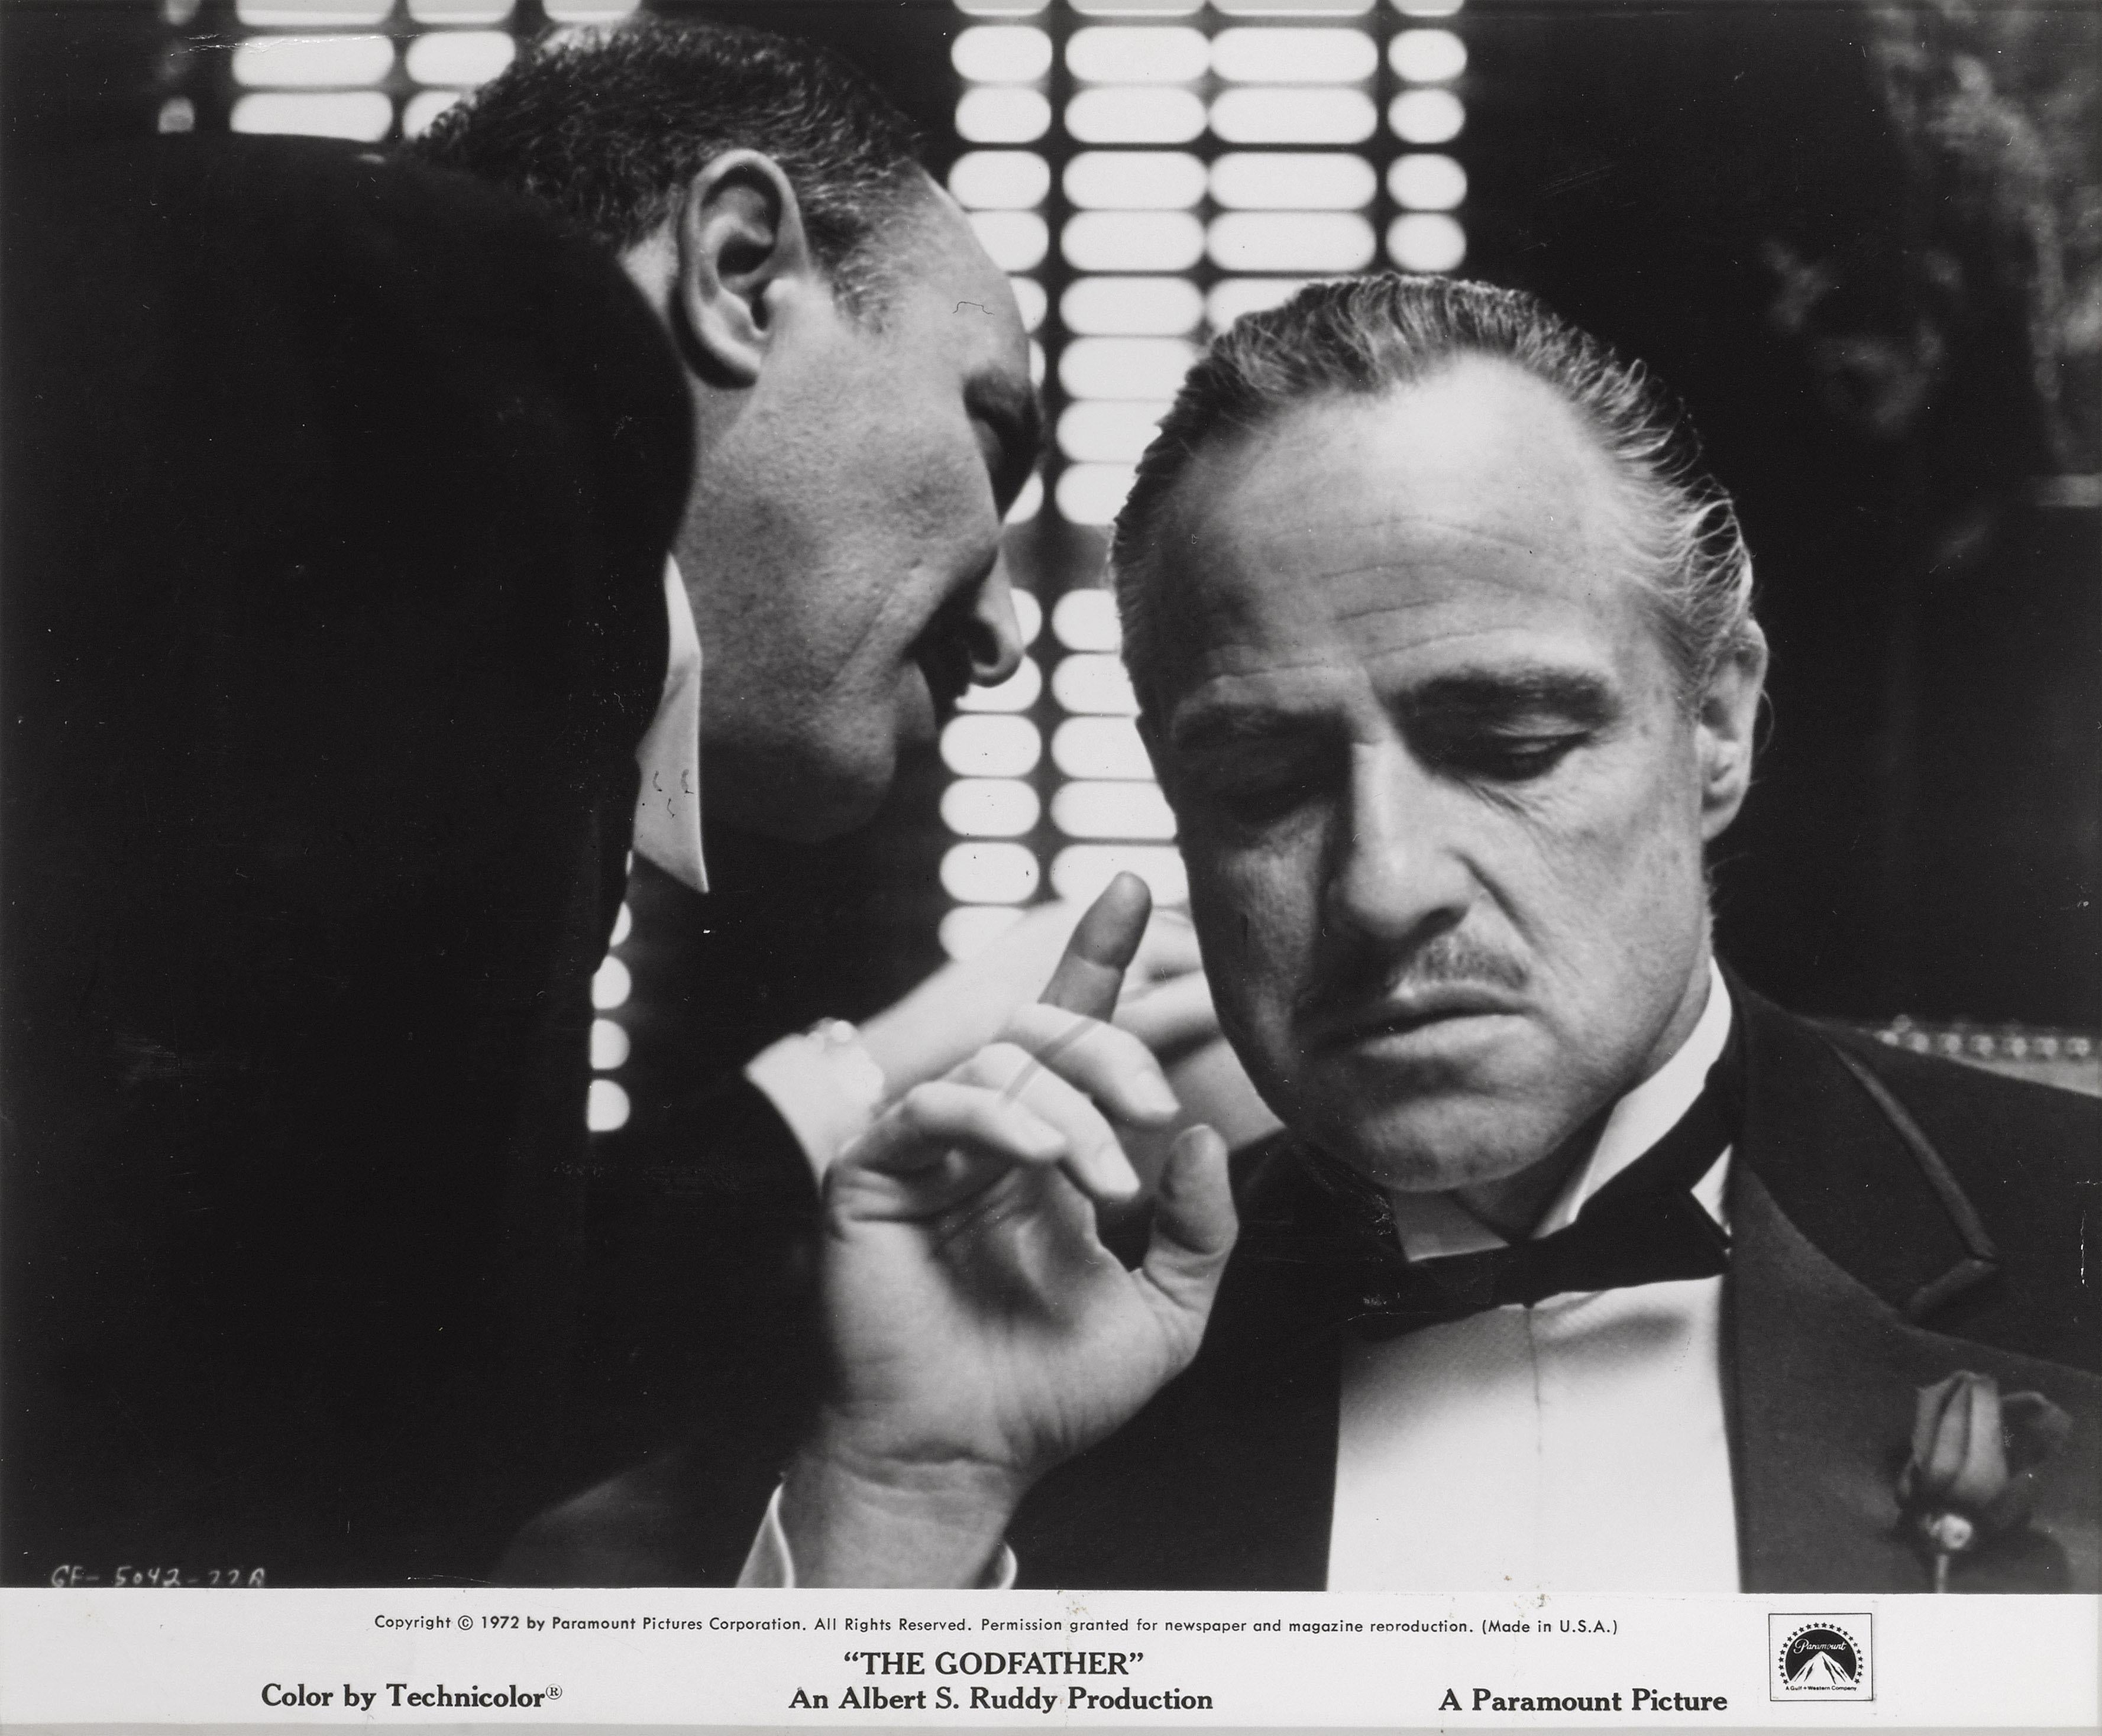 Original US photographic production still for Francis Ford Coppola's gangster masterpiece starring Marlon Brando, Al Pacino and Robert Duvall. This piece is Framed in a Sapele wood frame with acid free card mounts and UV plexiglass. The size given